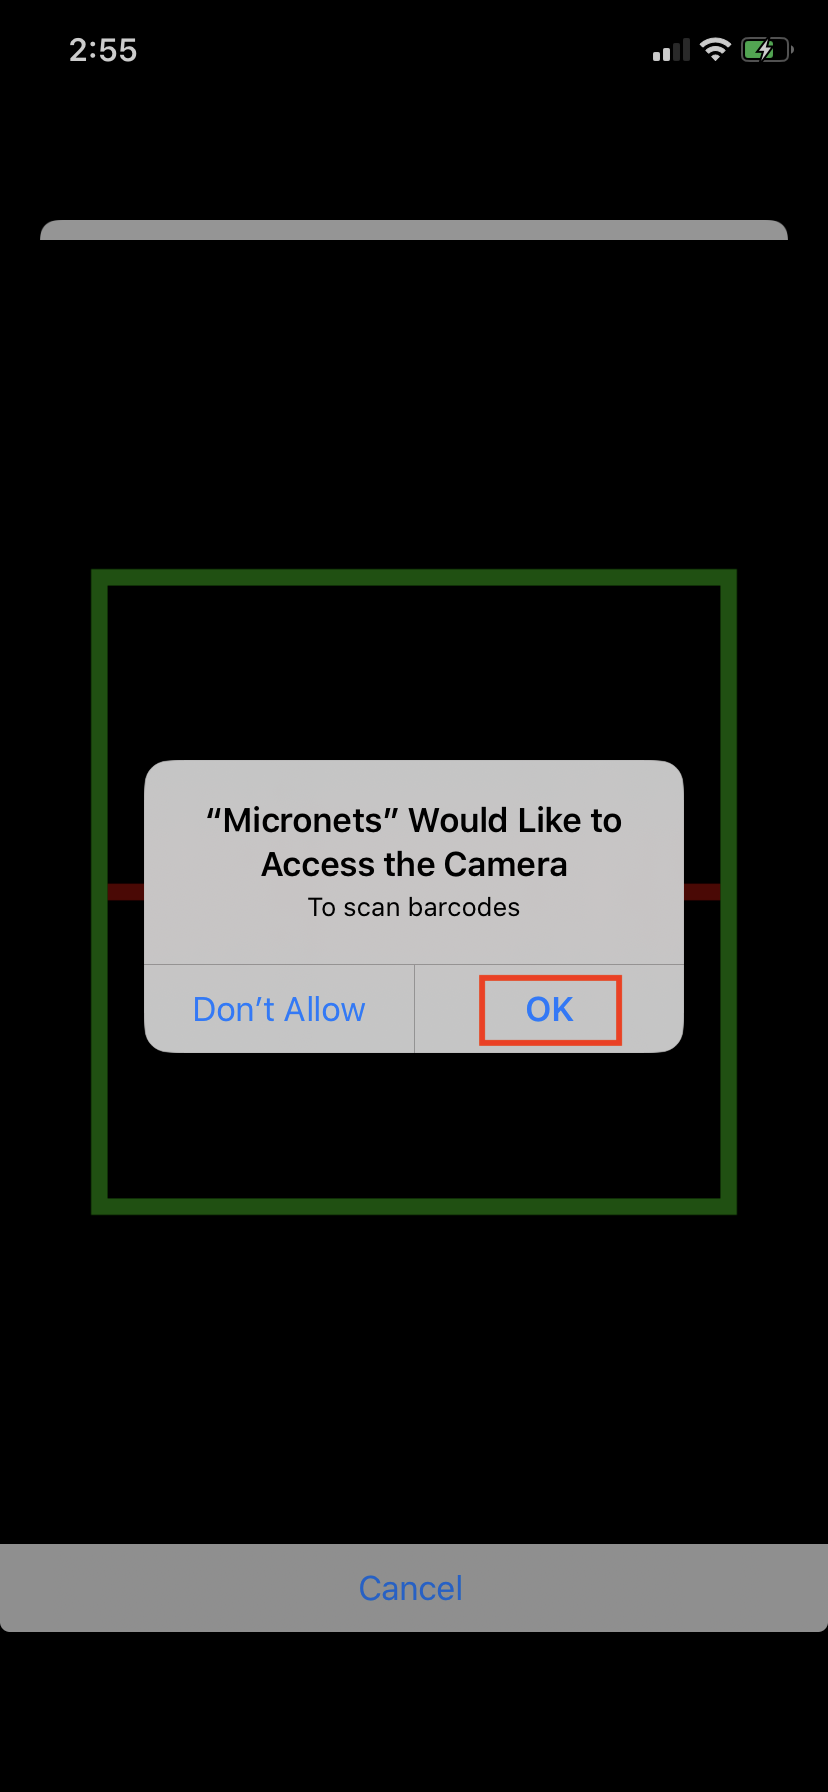 A screenshot of the micronets mobile application with a prompt for the user to allow Micronets to use access the camera. The OK button is enclosed with a red box, which is to be clicked.